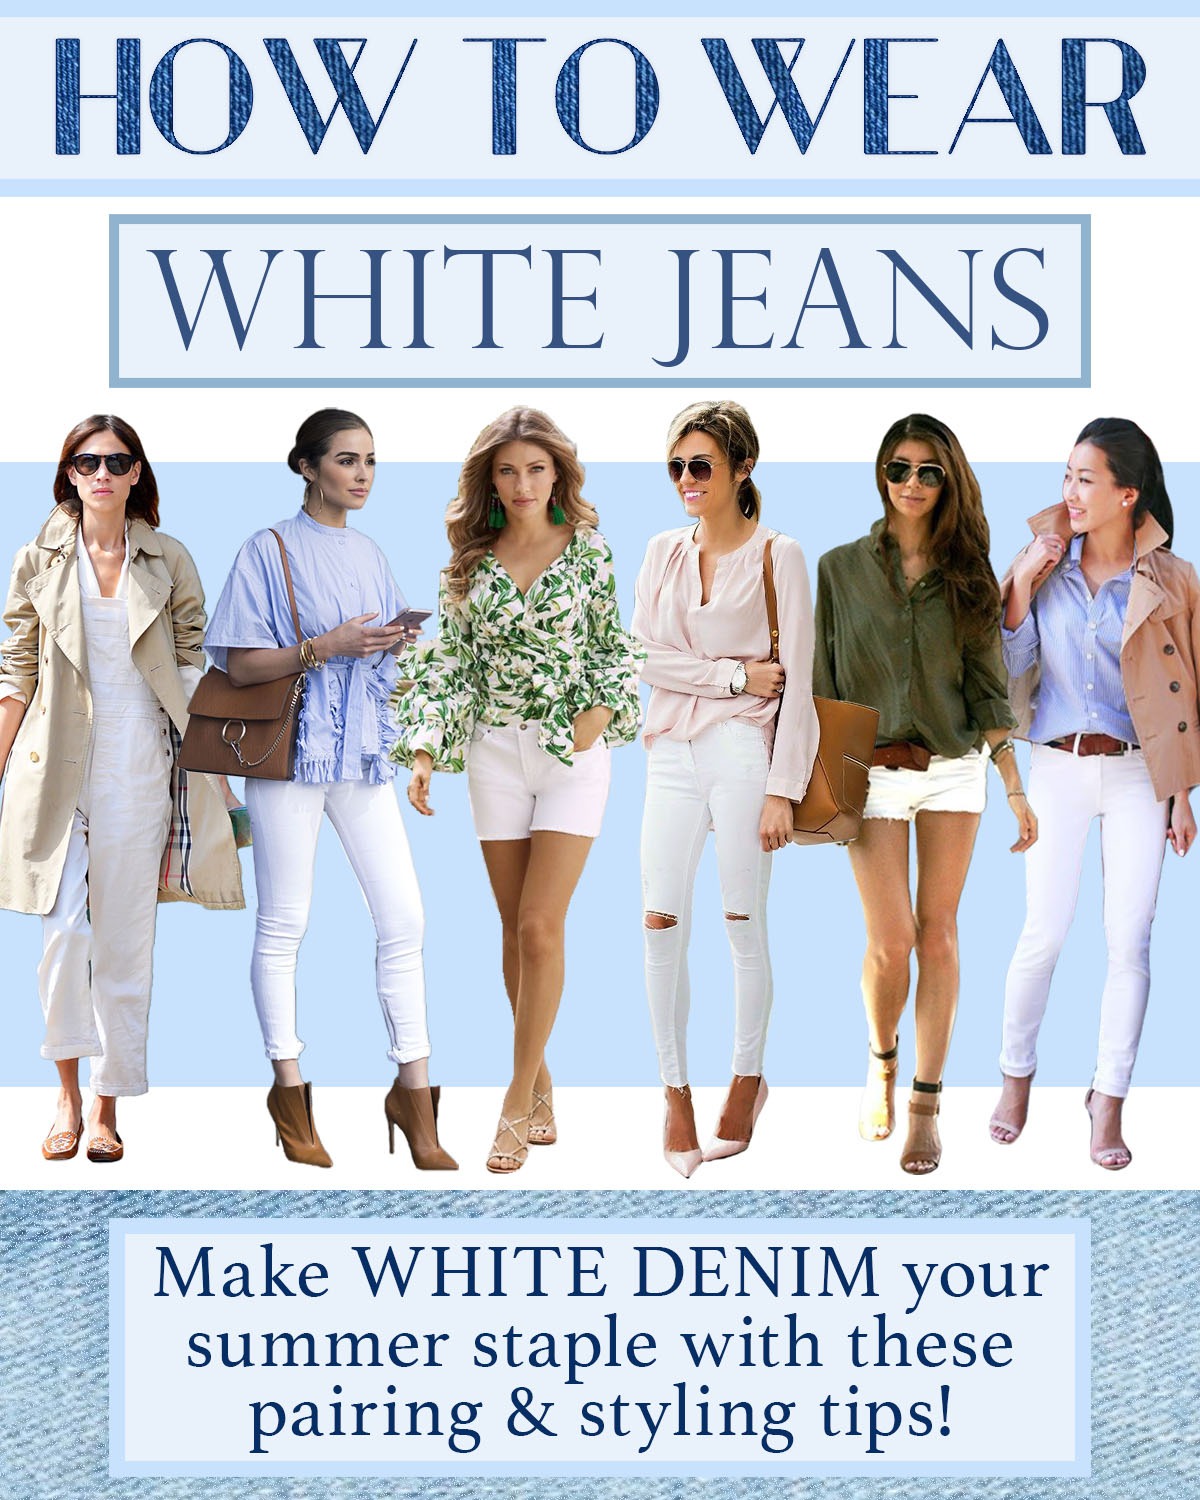 How to Dress Up White Jeans - Business Casual Outfit with White Jeans